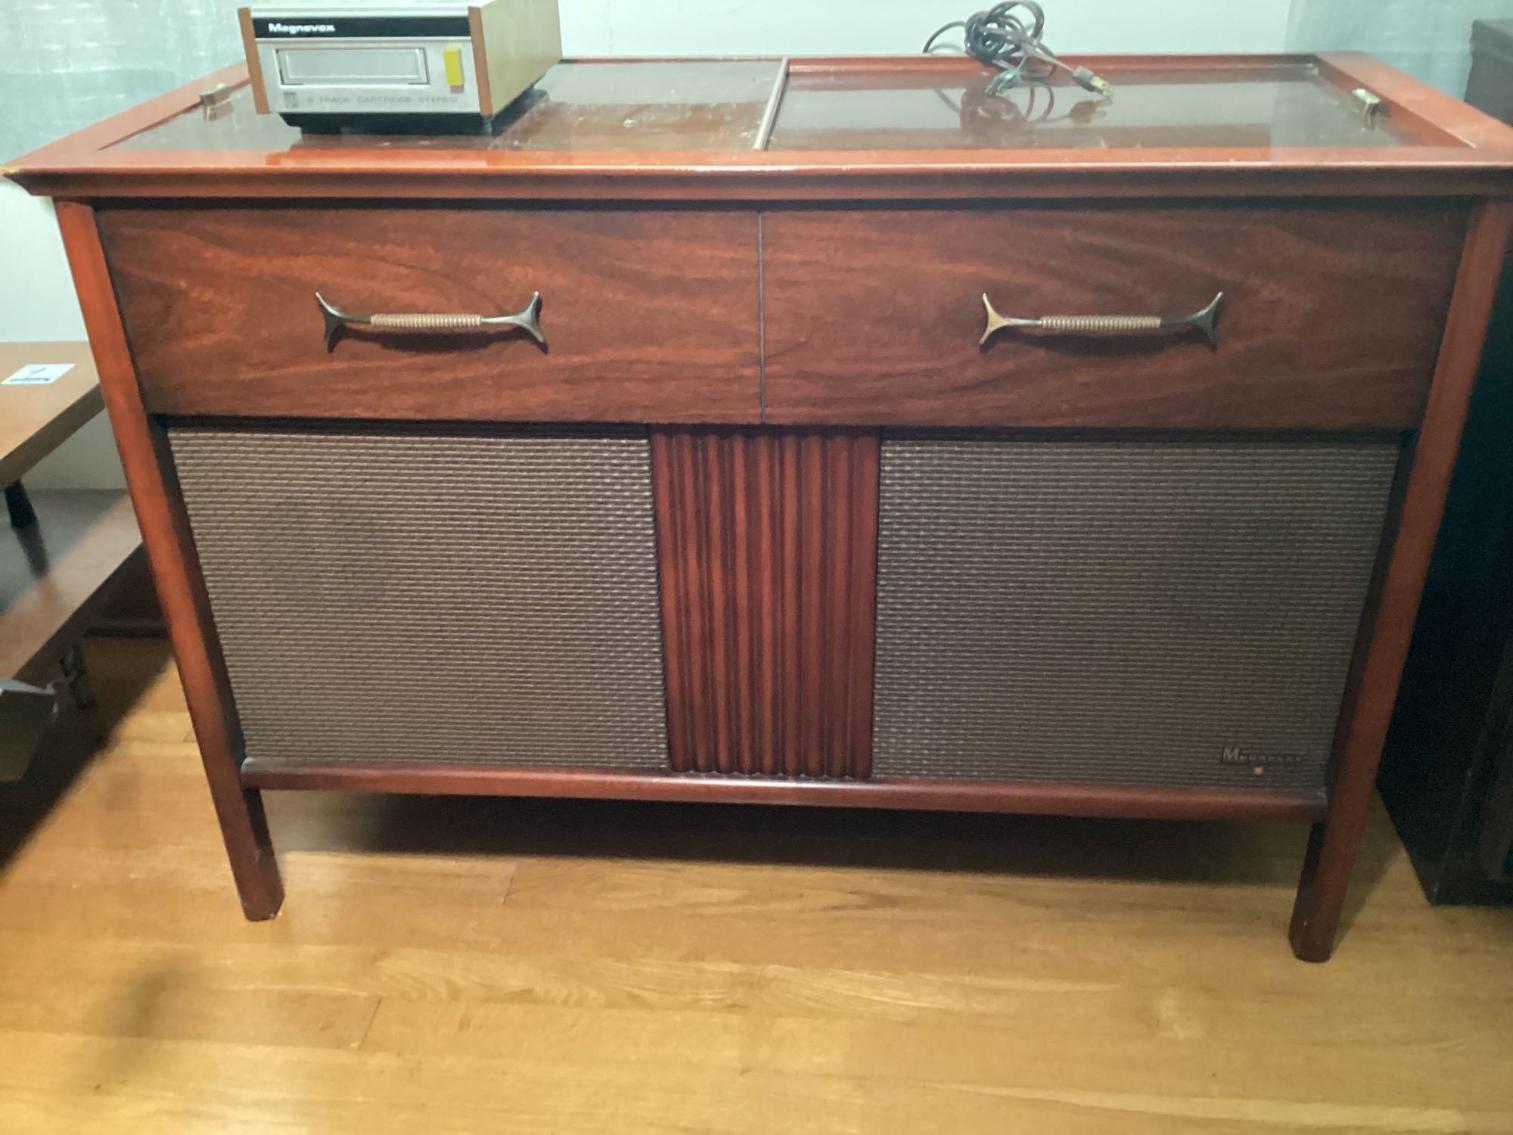 Image for Magnavox Stereo Record Player in Cabinet - Works!